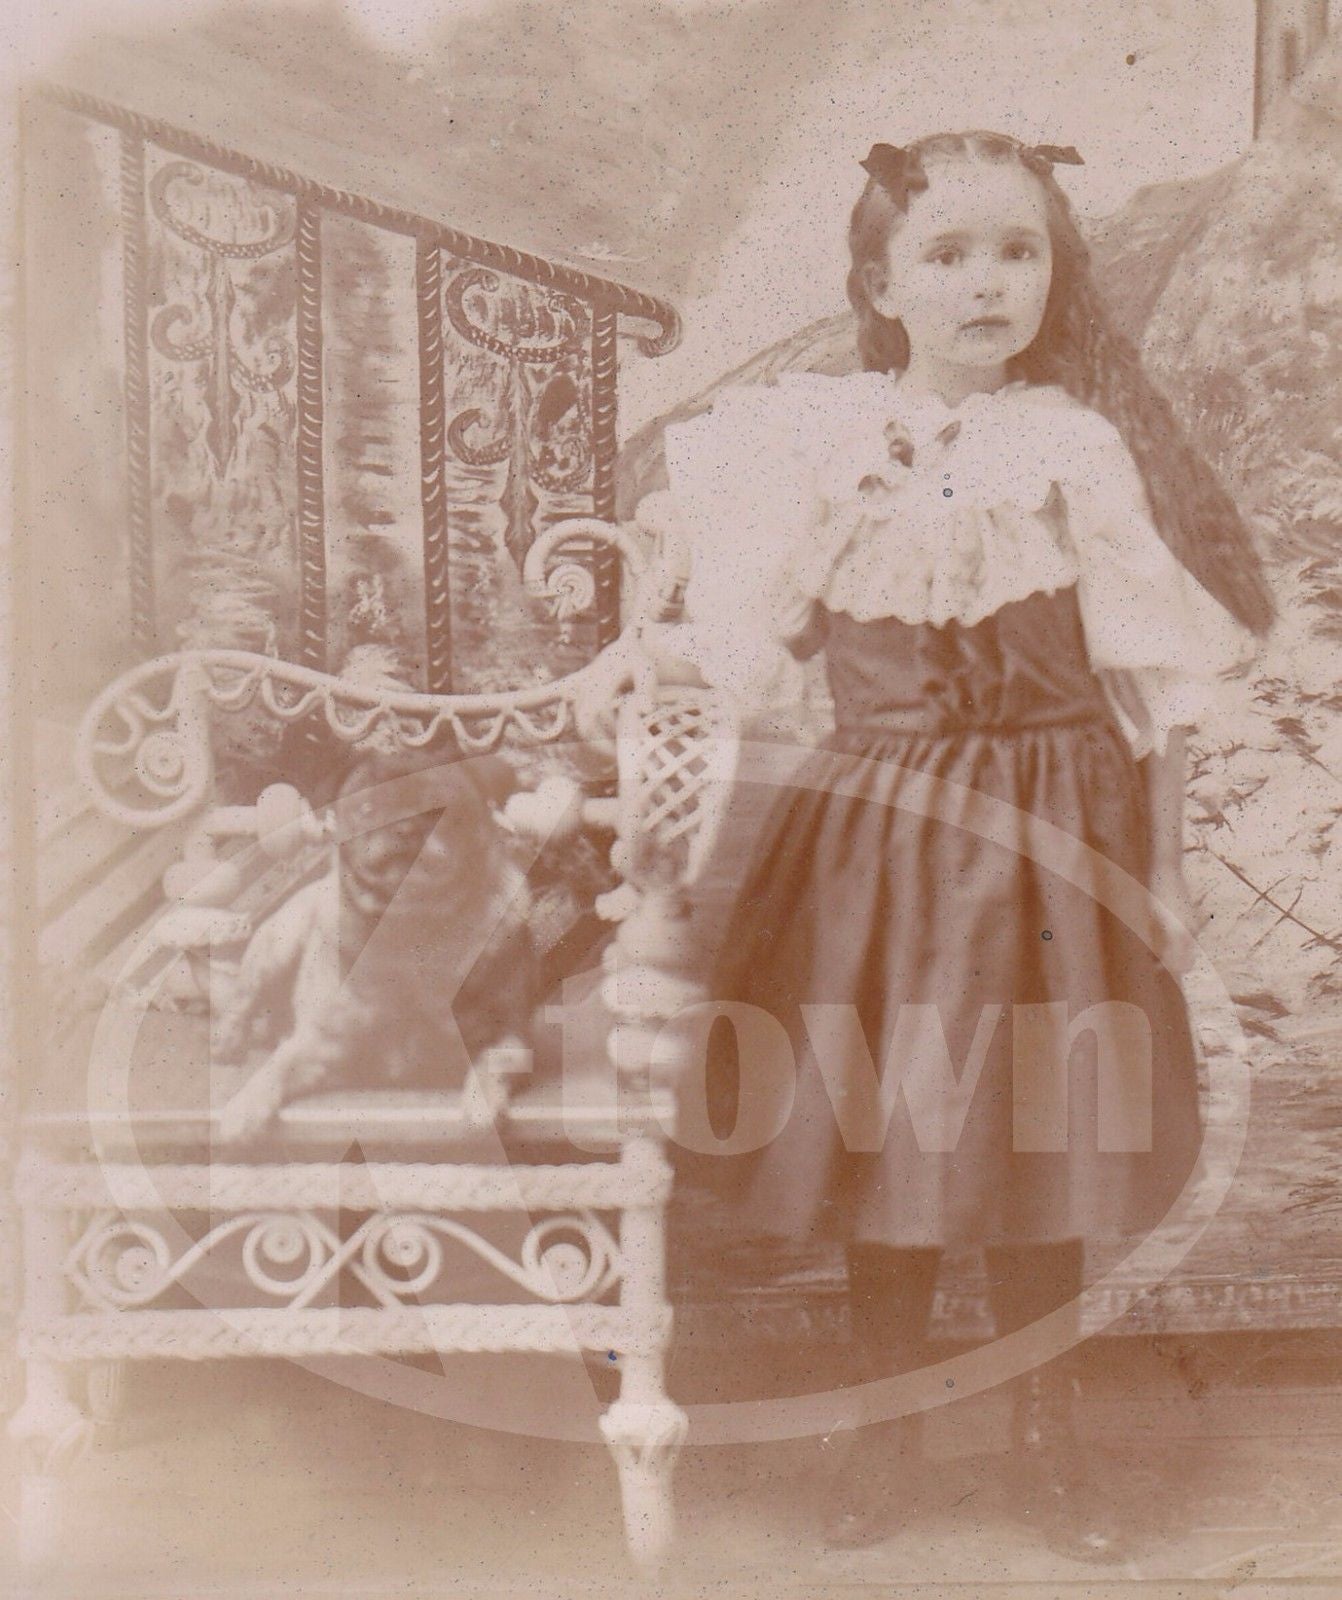 PUG PUPPY DOG & ETHNIC LITTLE GIRL CABINET CARD PHOTO W/ PHOTOGRAPHER'S NOTES - K-townConsignments